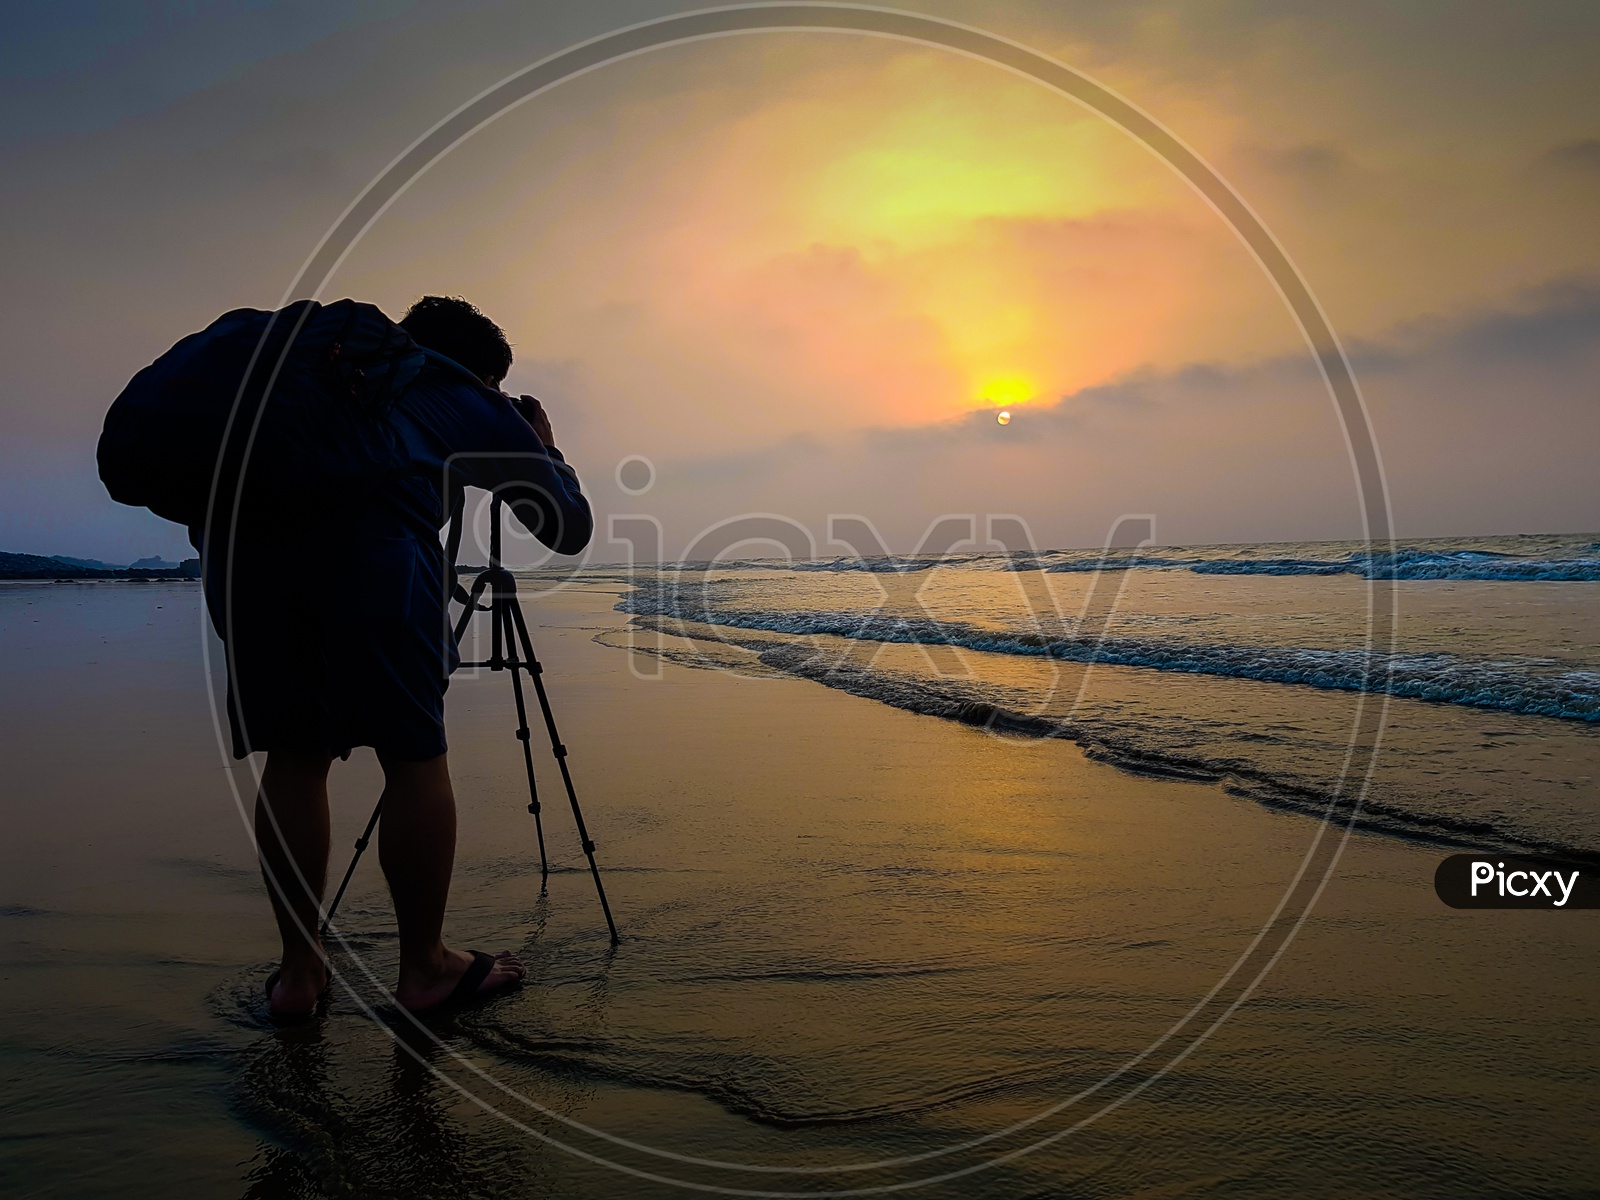 A Photographer With A Bagpack Taking Photo Of Sunrise At The Beach At Dawn